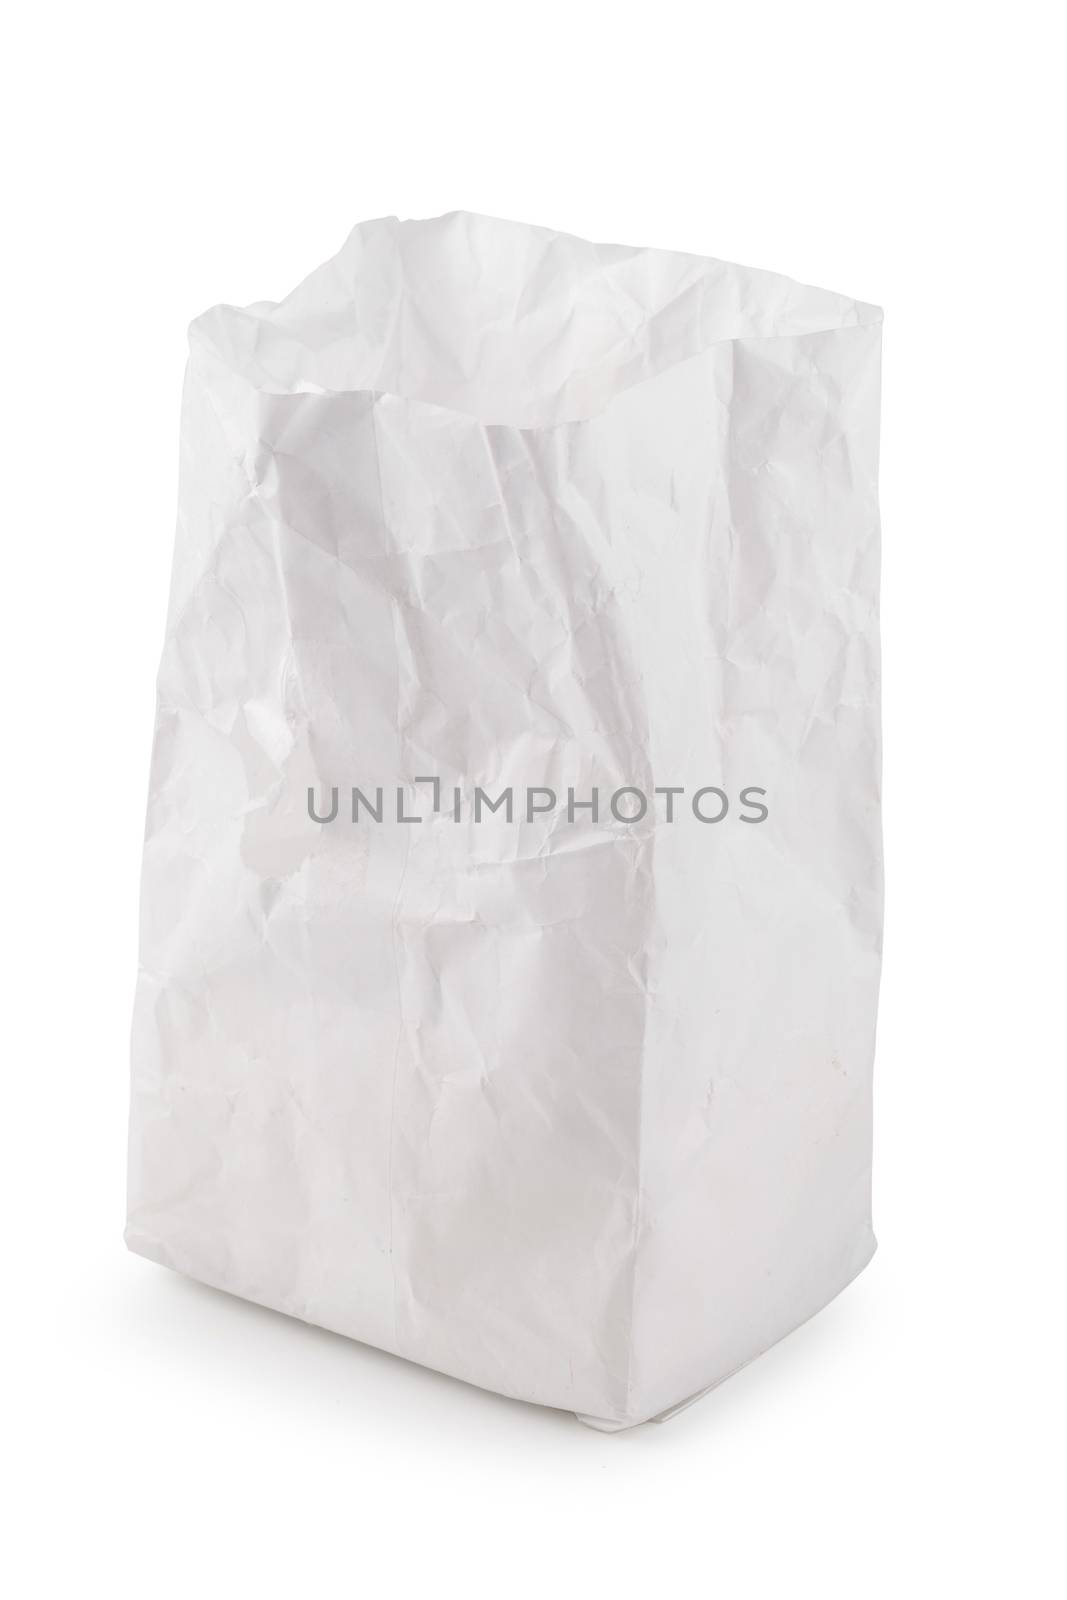 Used white paper bag isolated on a white background by kaiskynet